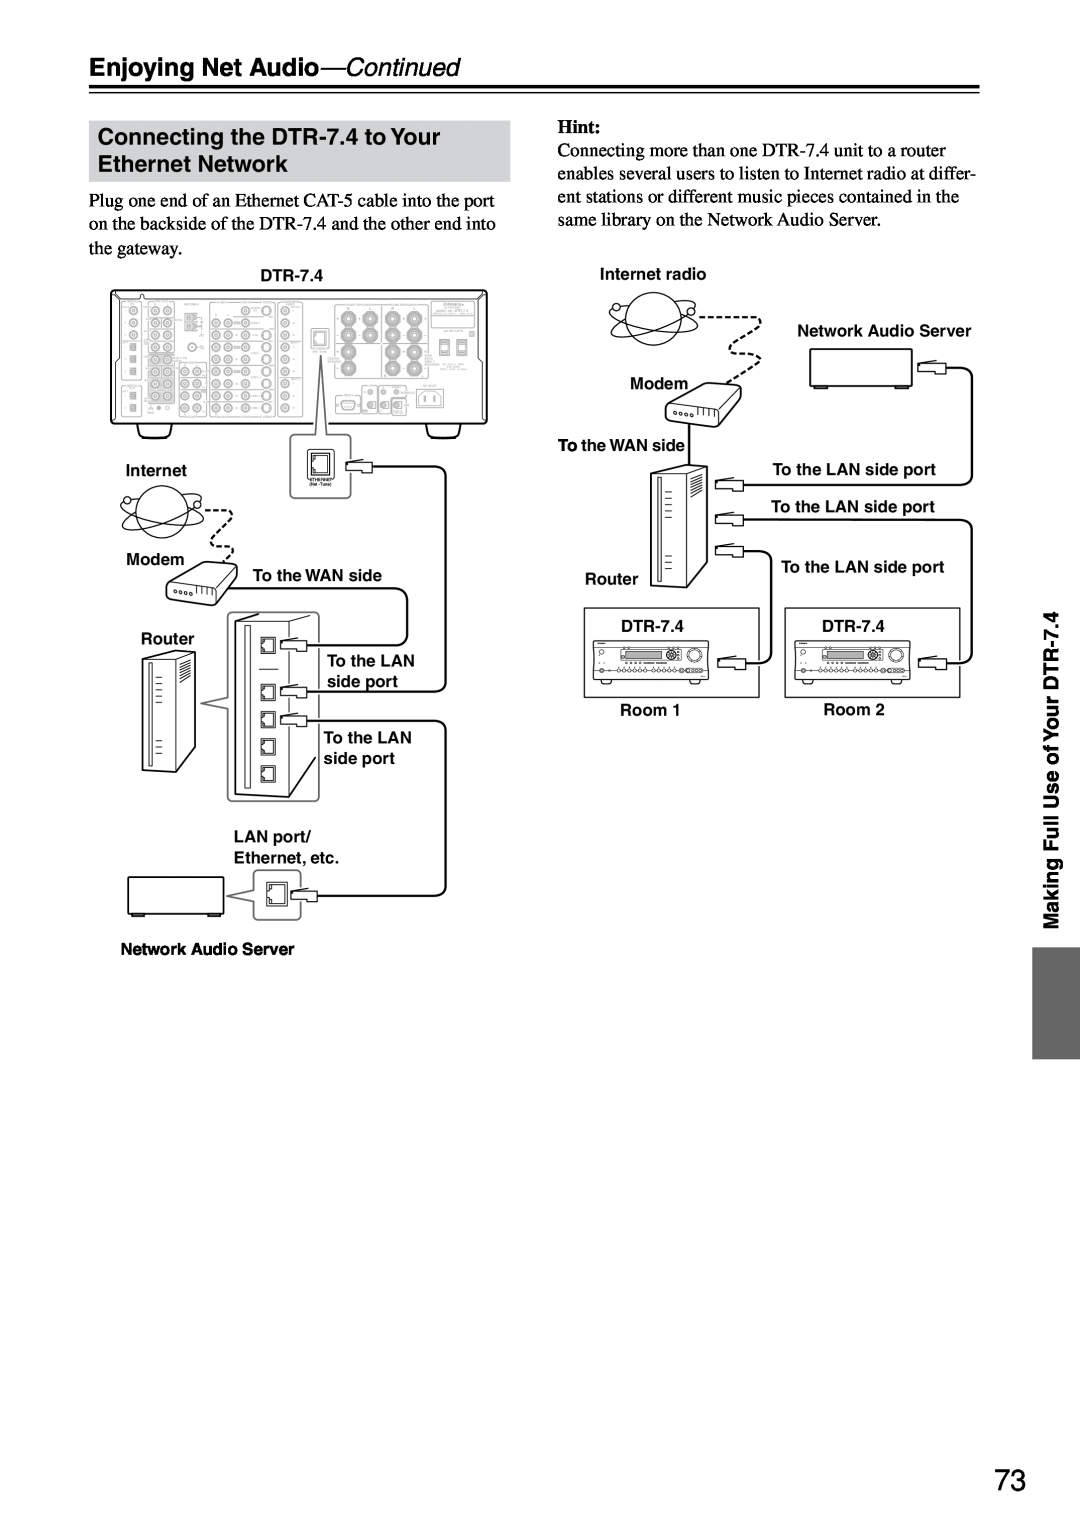 Integra instruction manual Enjoying Net Audio—Continued, Connecting the DTR-7.4to Your Ethernet Network, Hint 